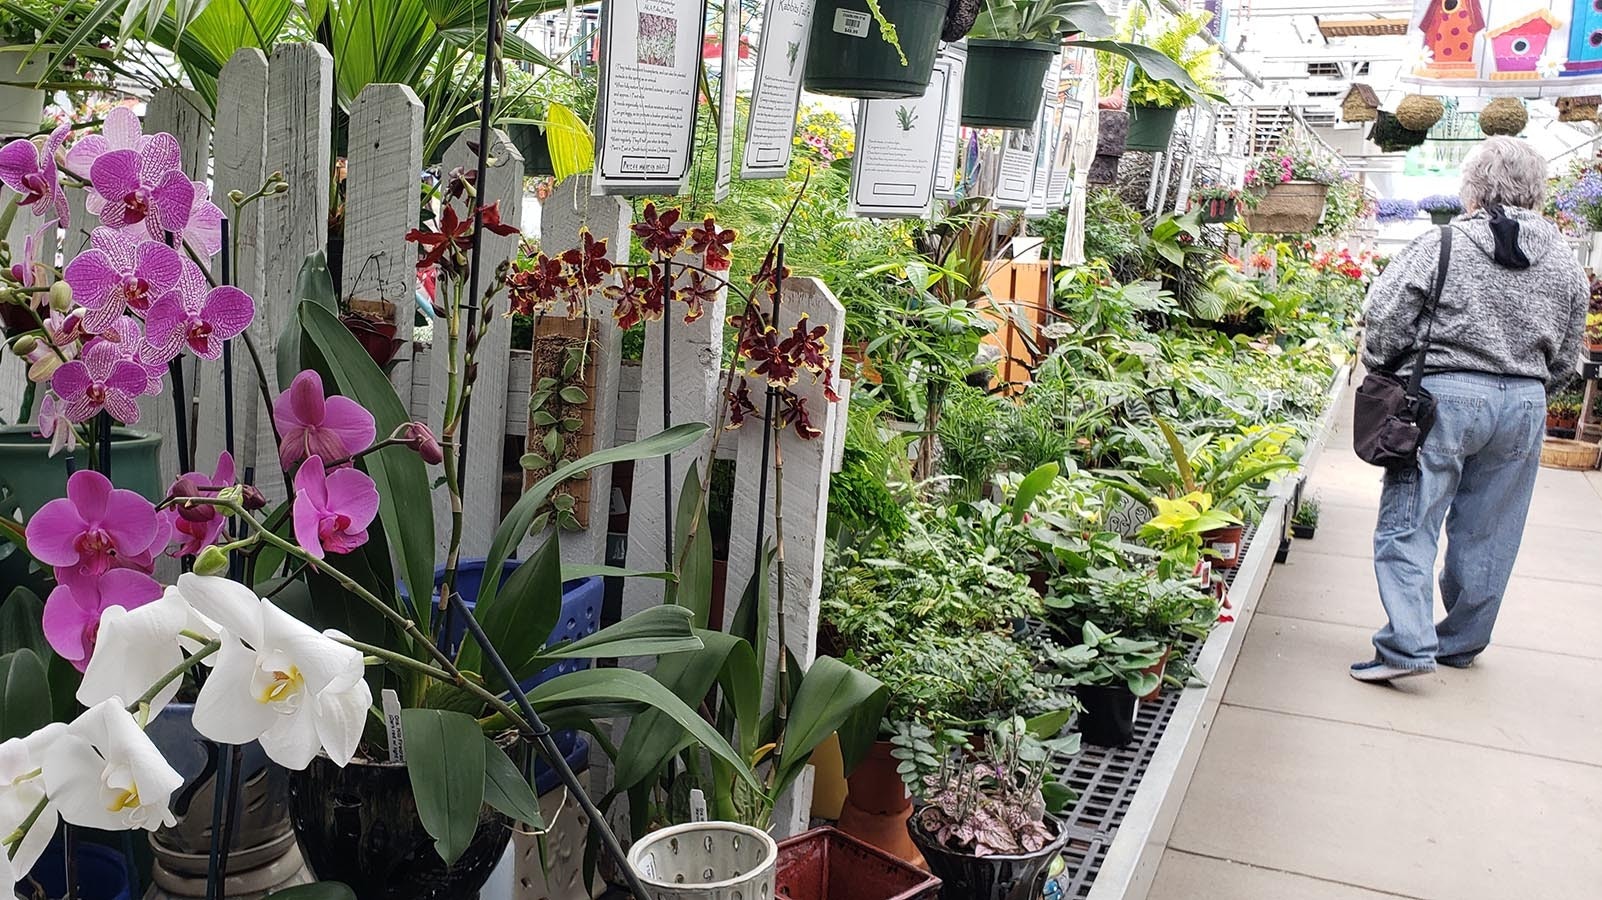 Orchids, ferns and more.